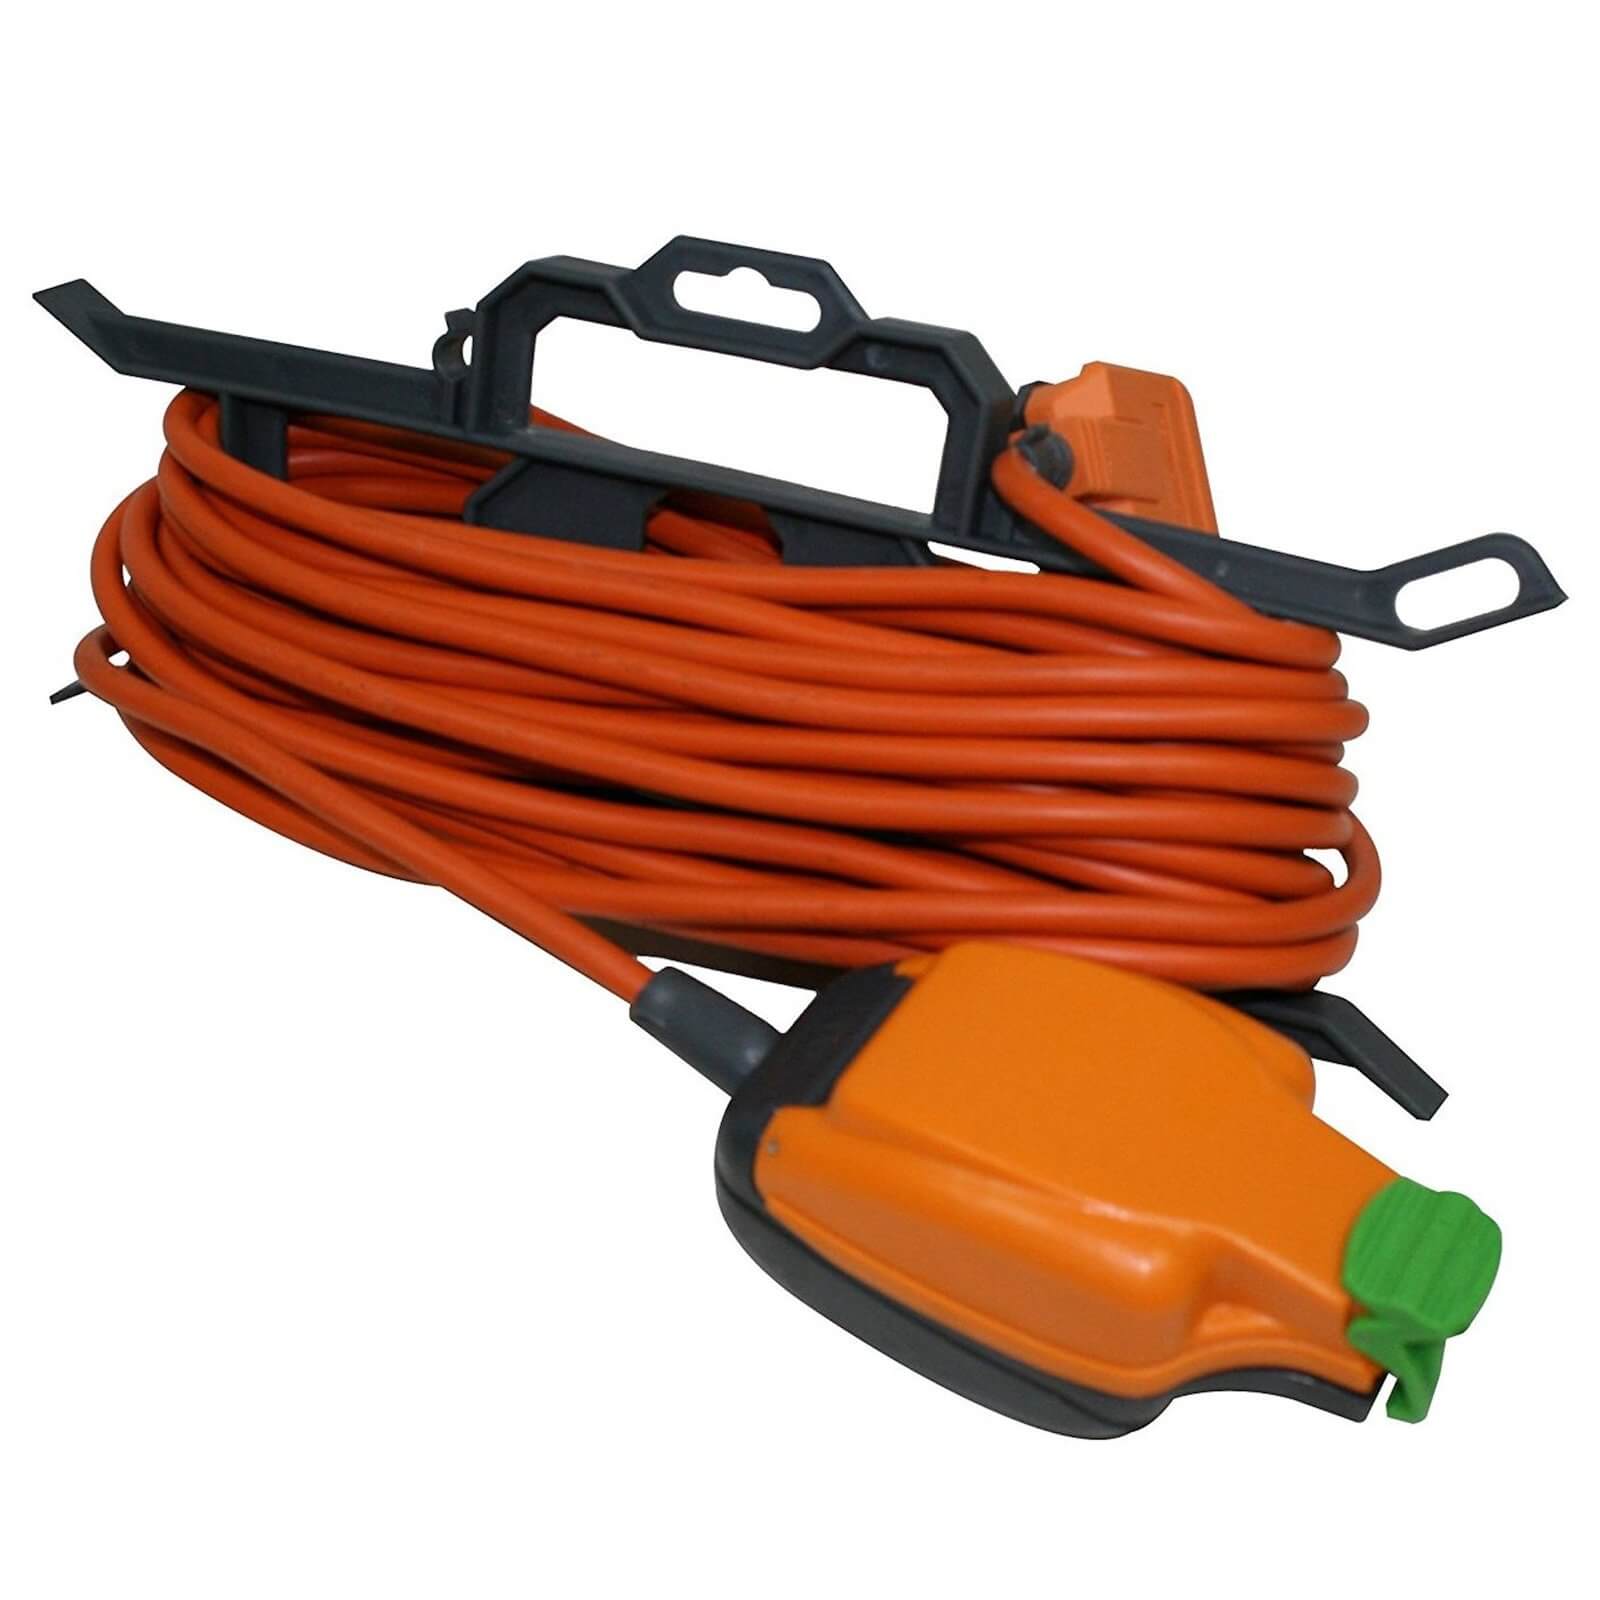 Photo of Masterplug 1 Ip Rated Socket Heavy Duty Extension Lead With Cable Carrier 15m Orange/black